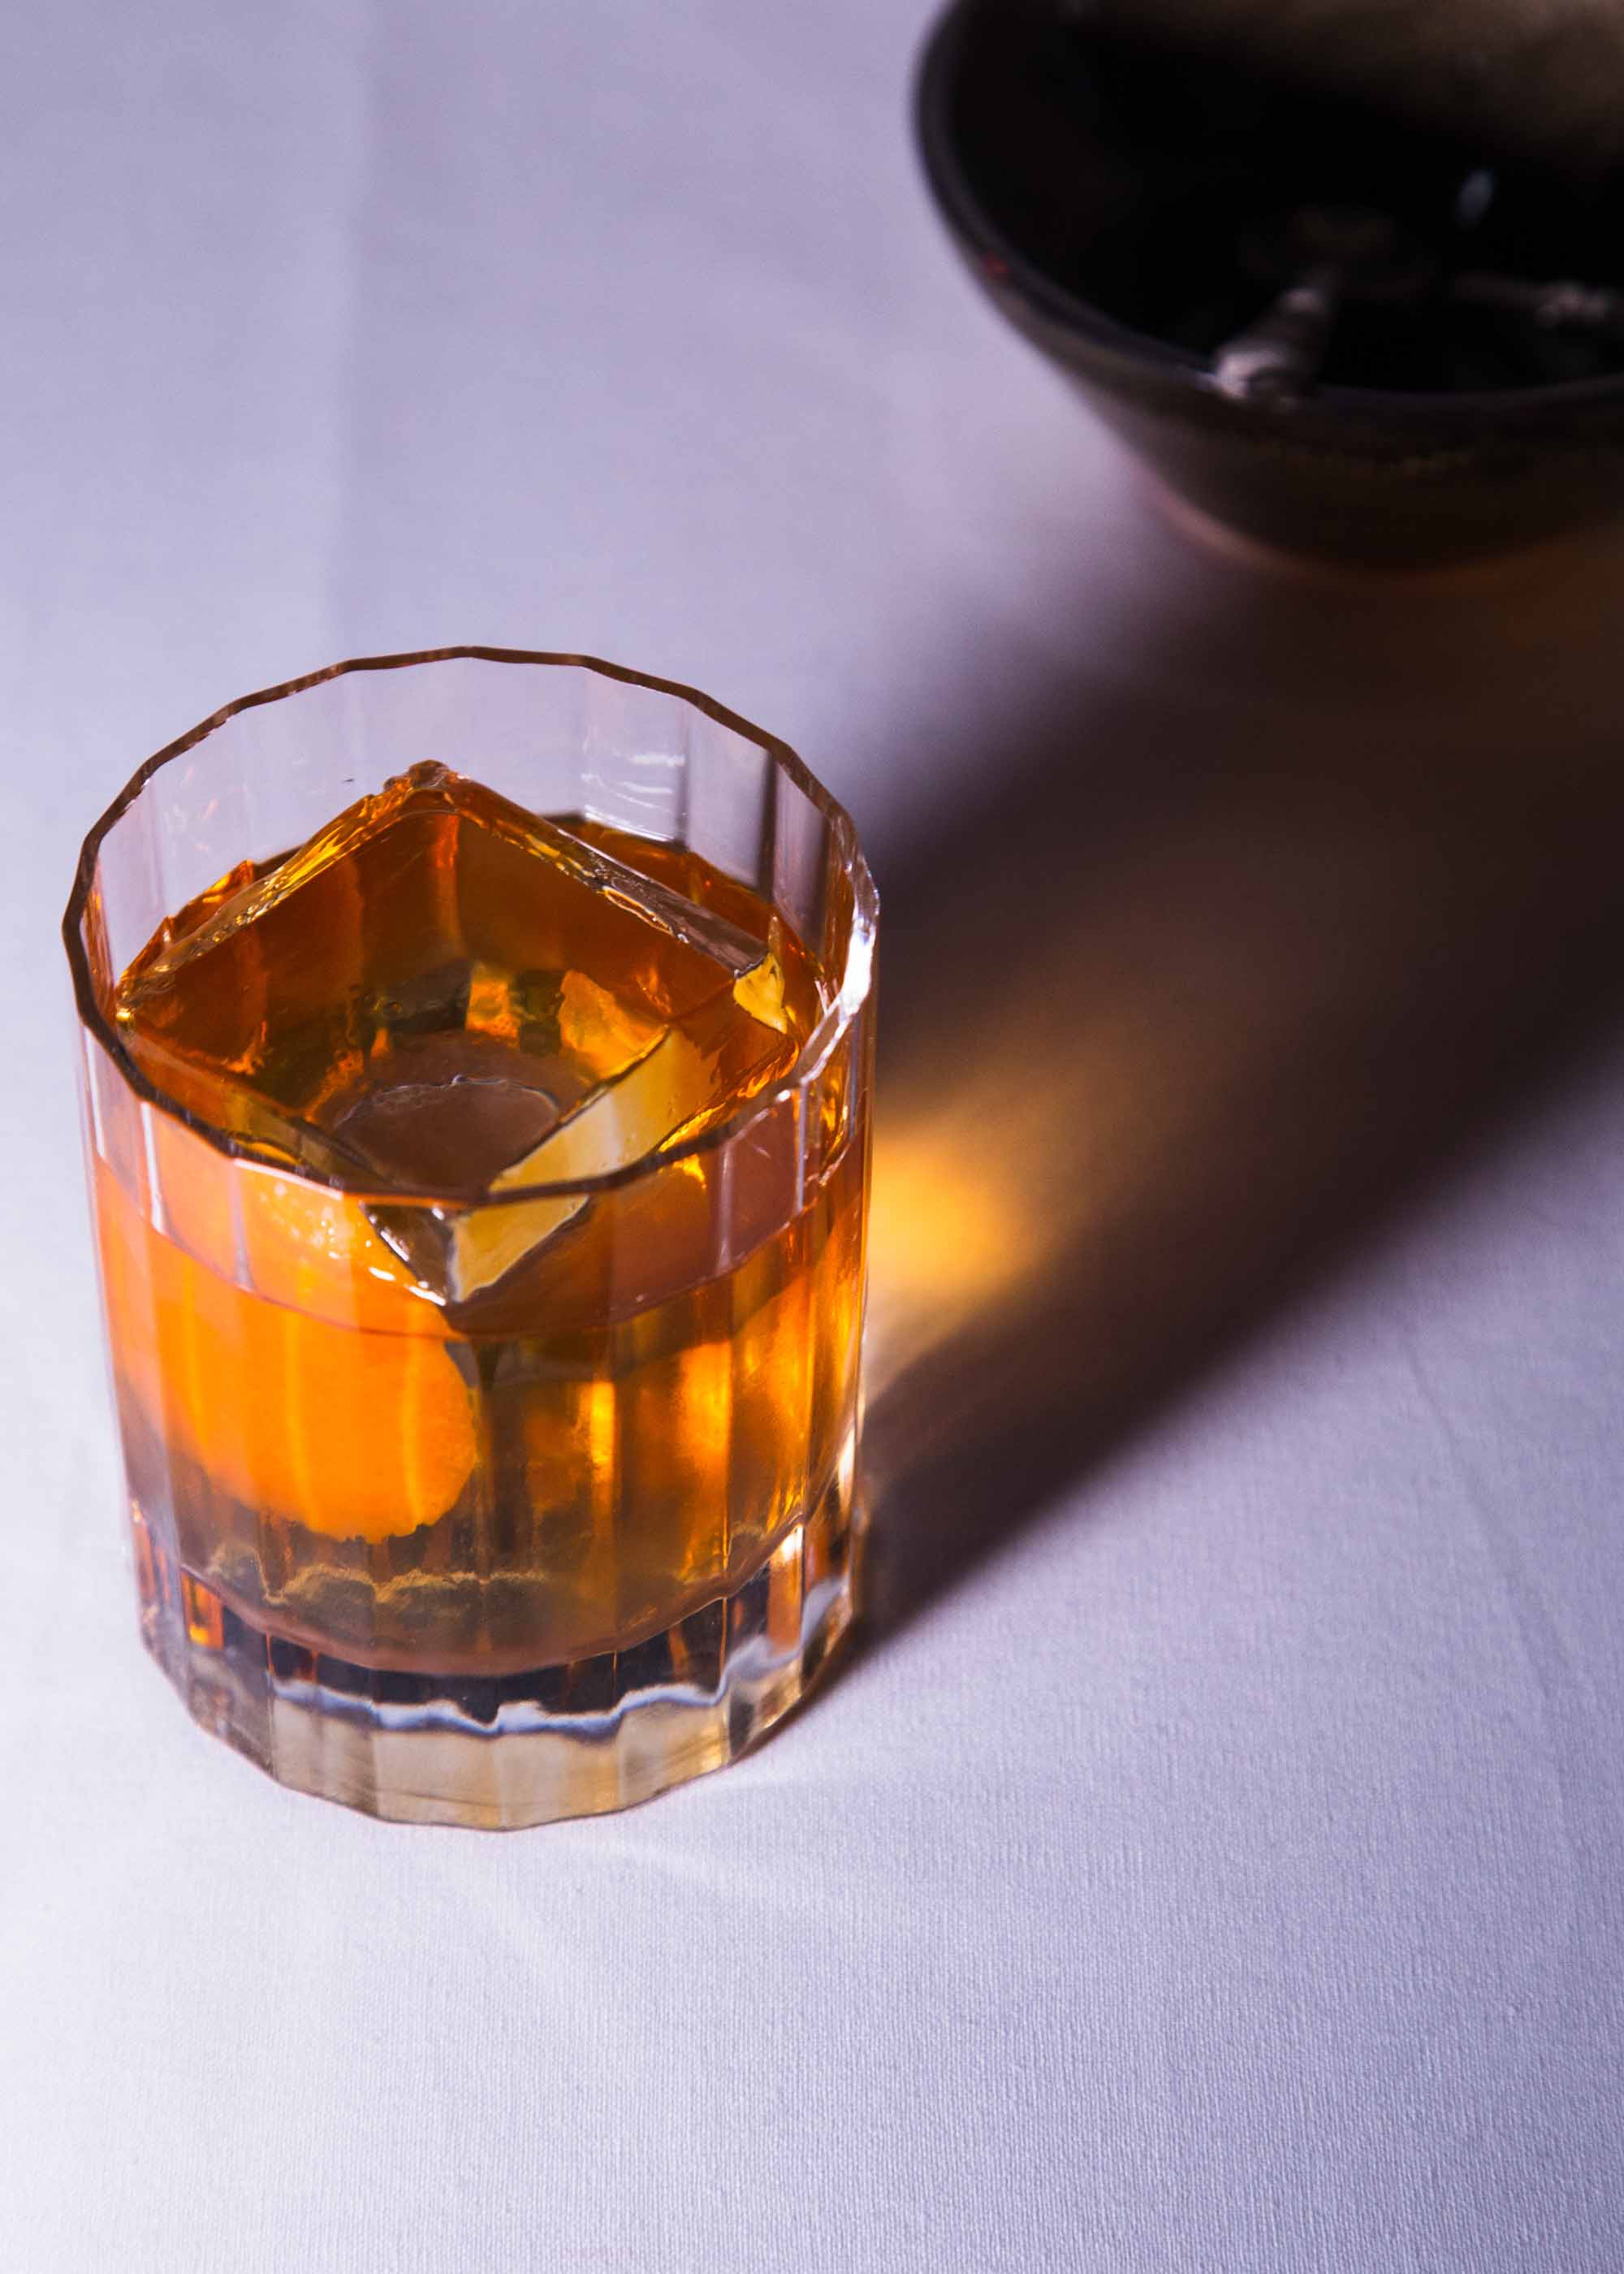 The Old Fashioned cocktail is a taste of cocktail history